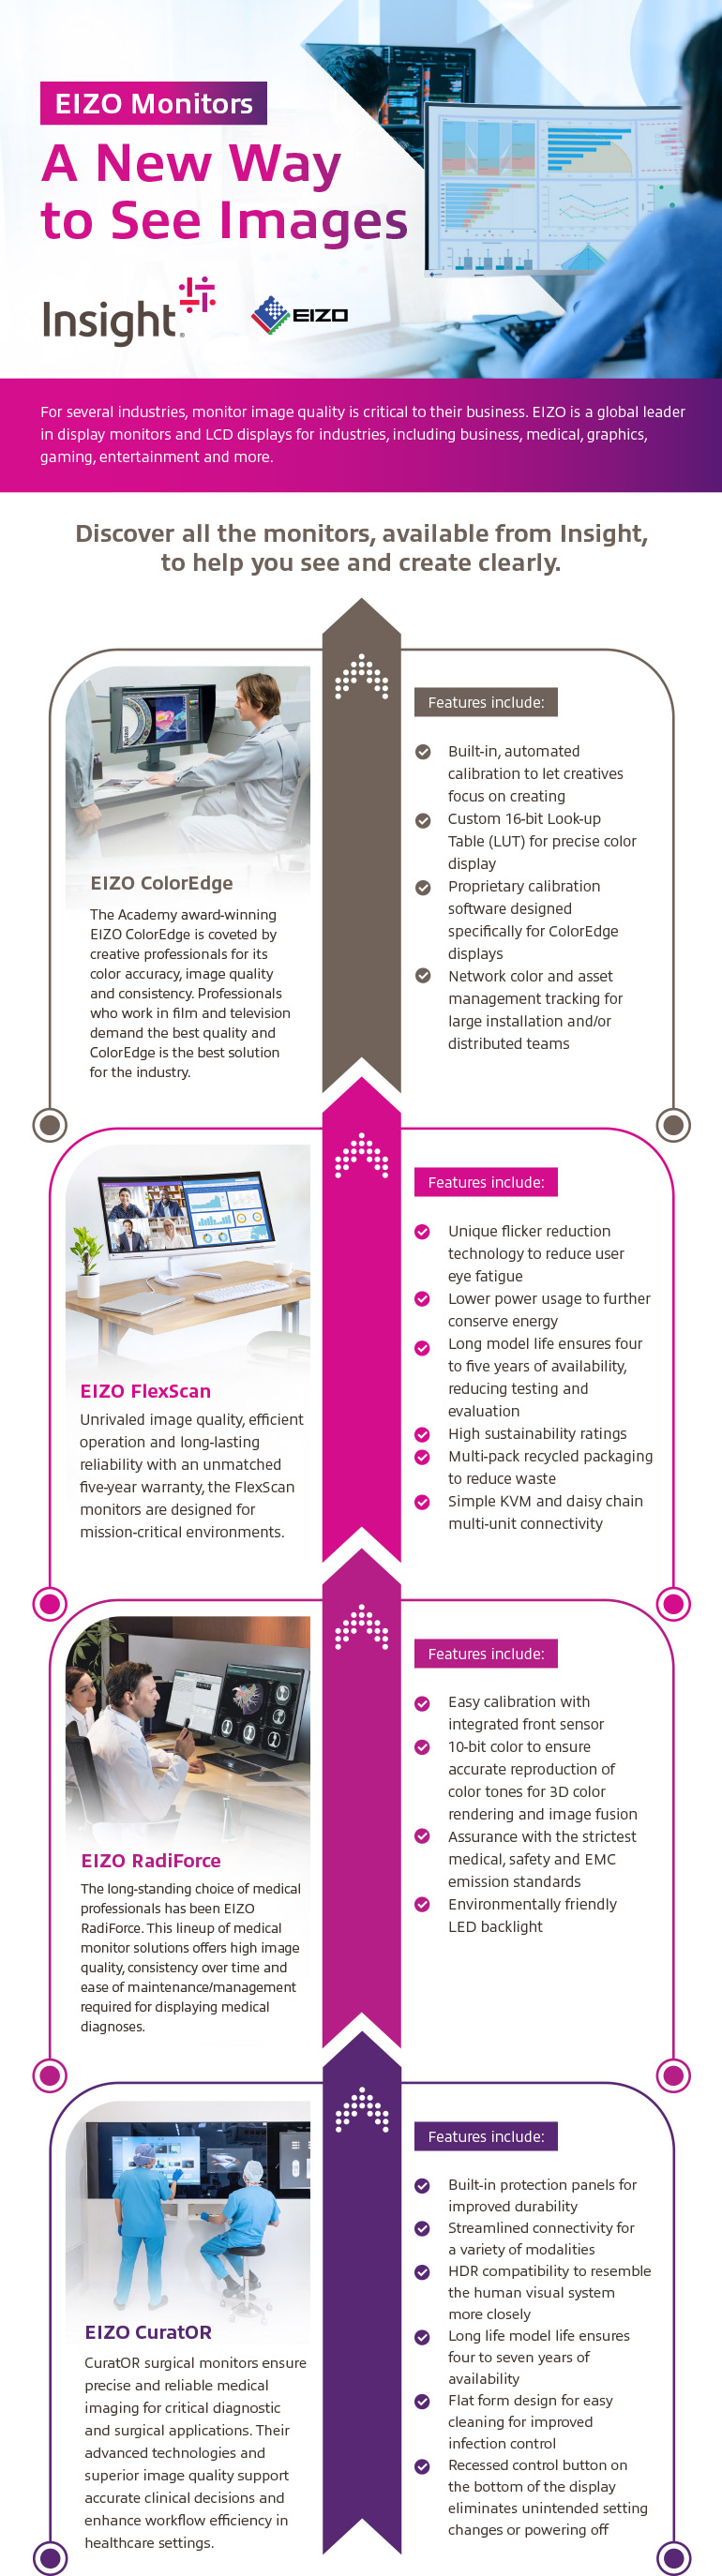 EIZO Monitors: A New Way to See Images  infographic